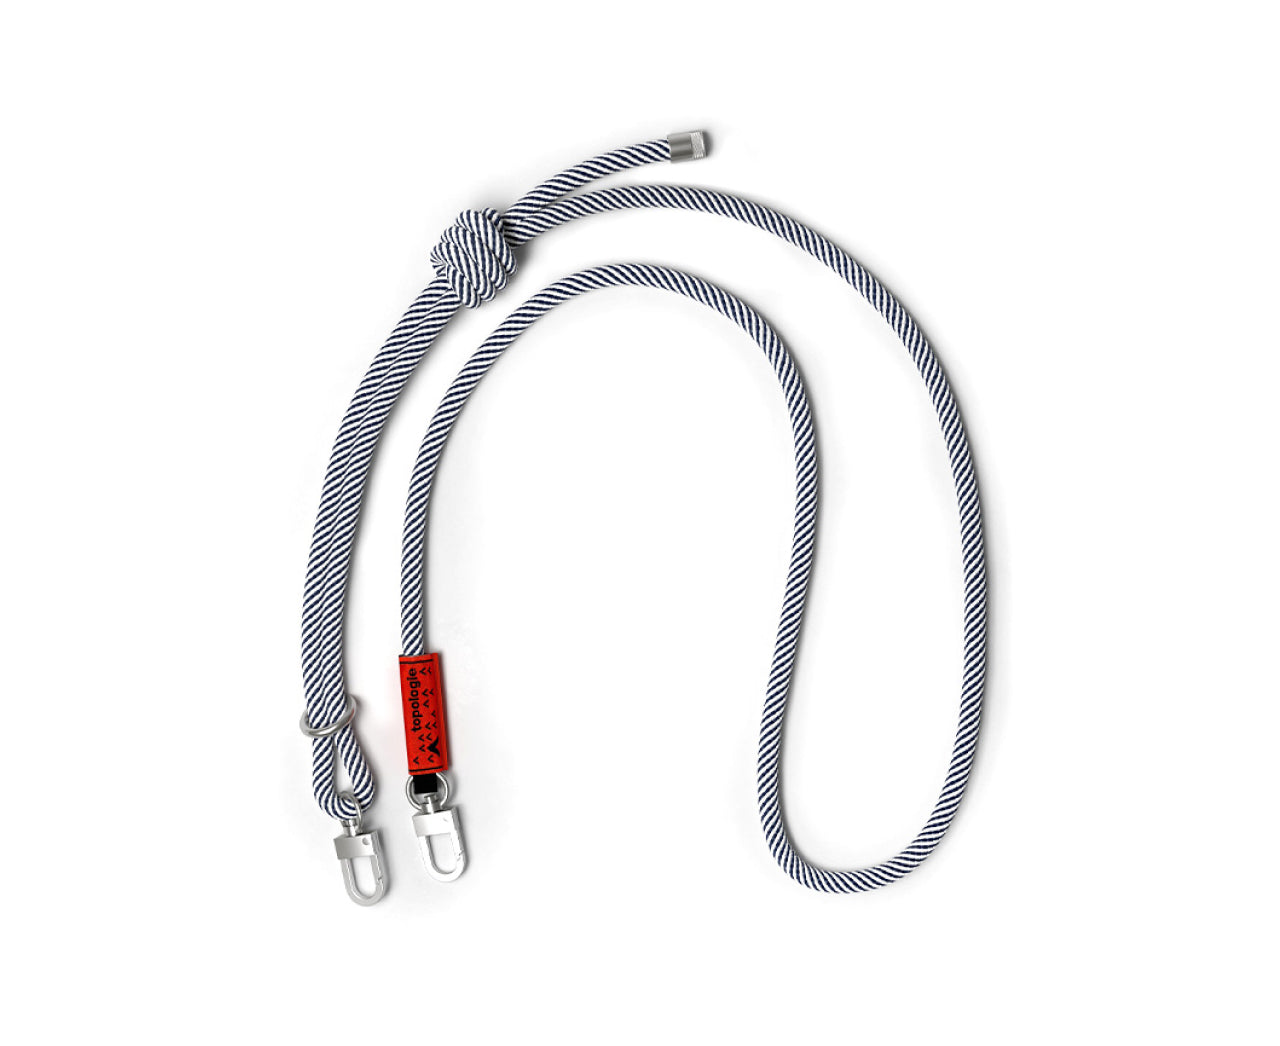 Wares Rope Strap - 8.0mm